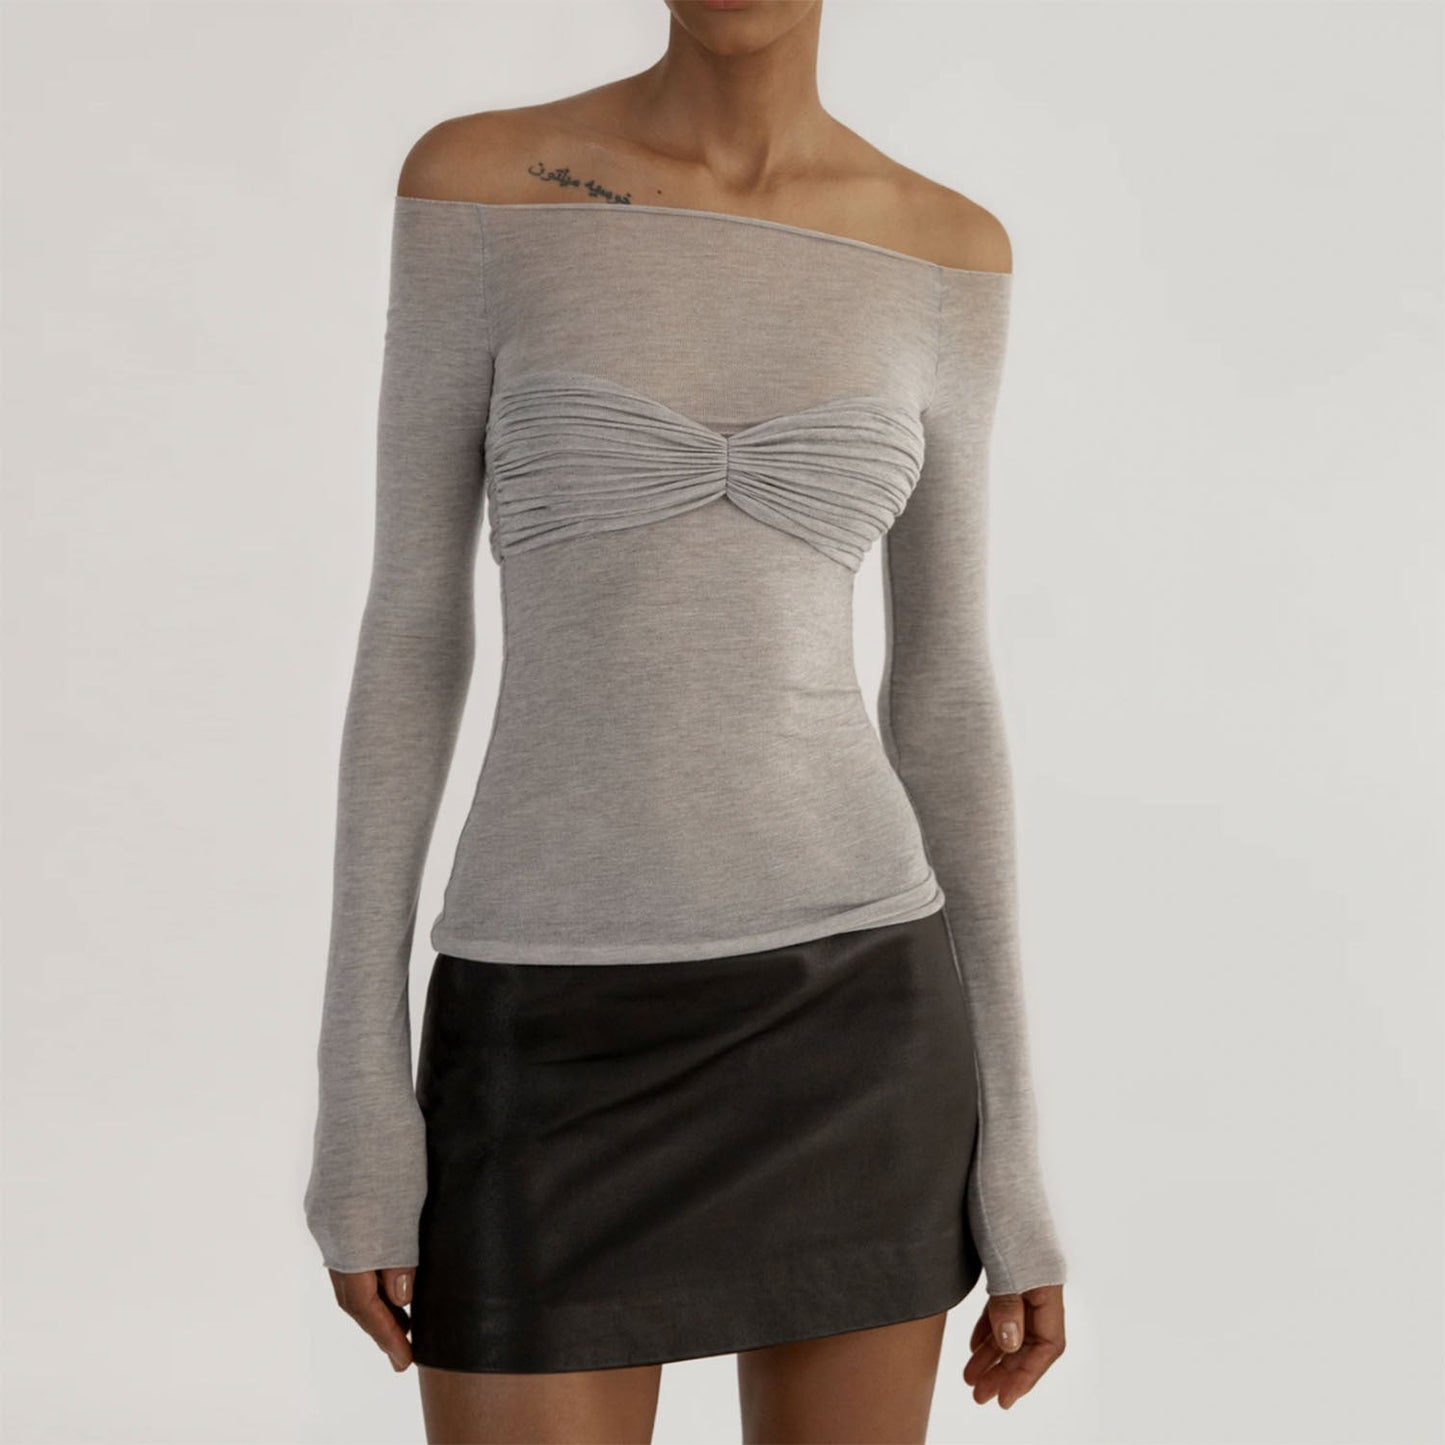 Sexy Off The Shoulder See Through Women Tops-Shirts & Tops-Gray-S-Free Shipping Leatheretro